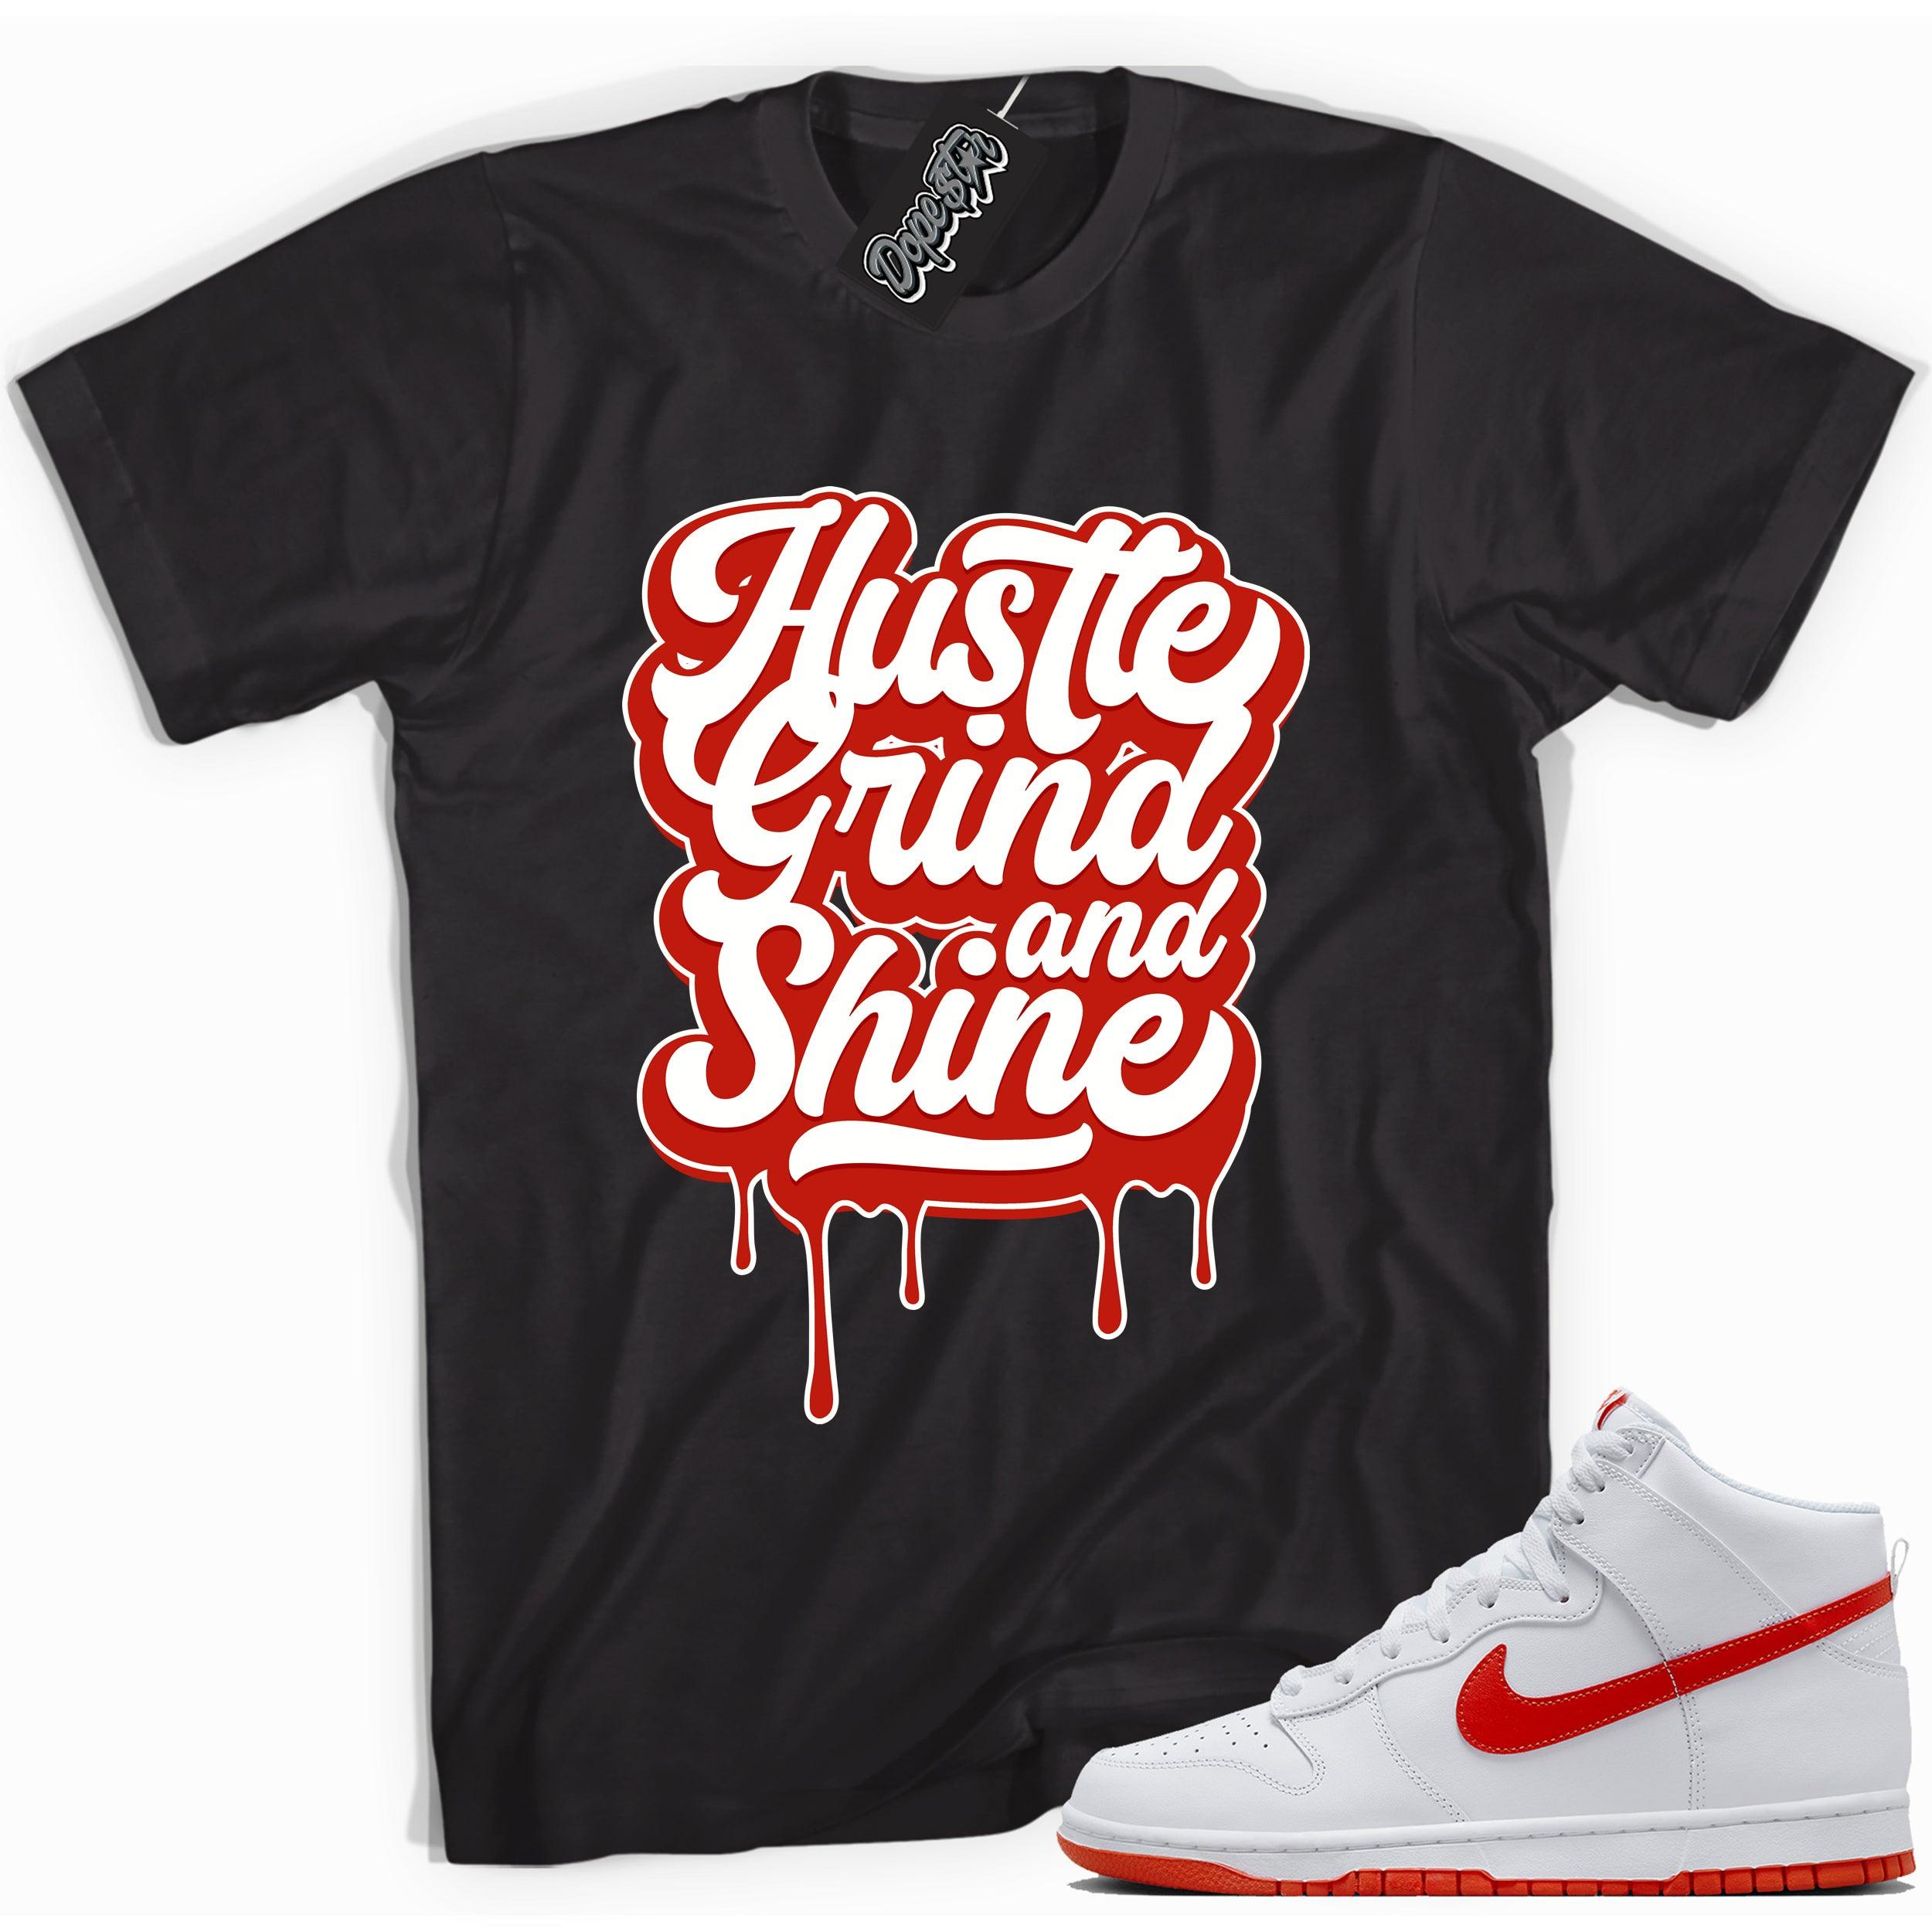 Cool black graphic tee with 'hustle grind and shine' print, that perfectly matches Nike Dunk High White Picante Red sneakers.